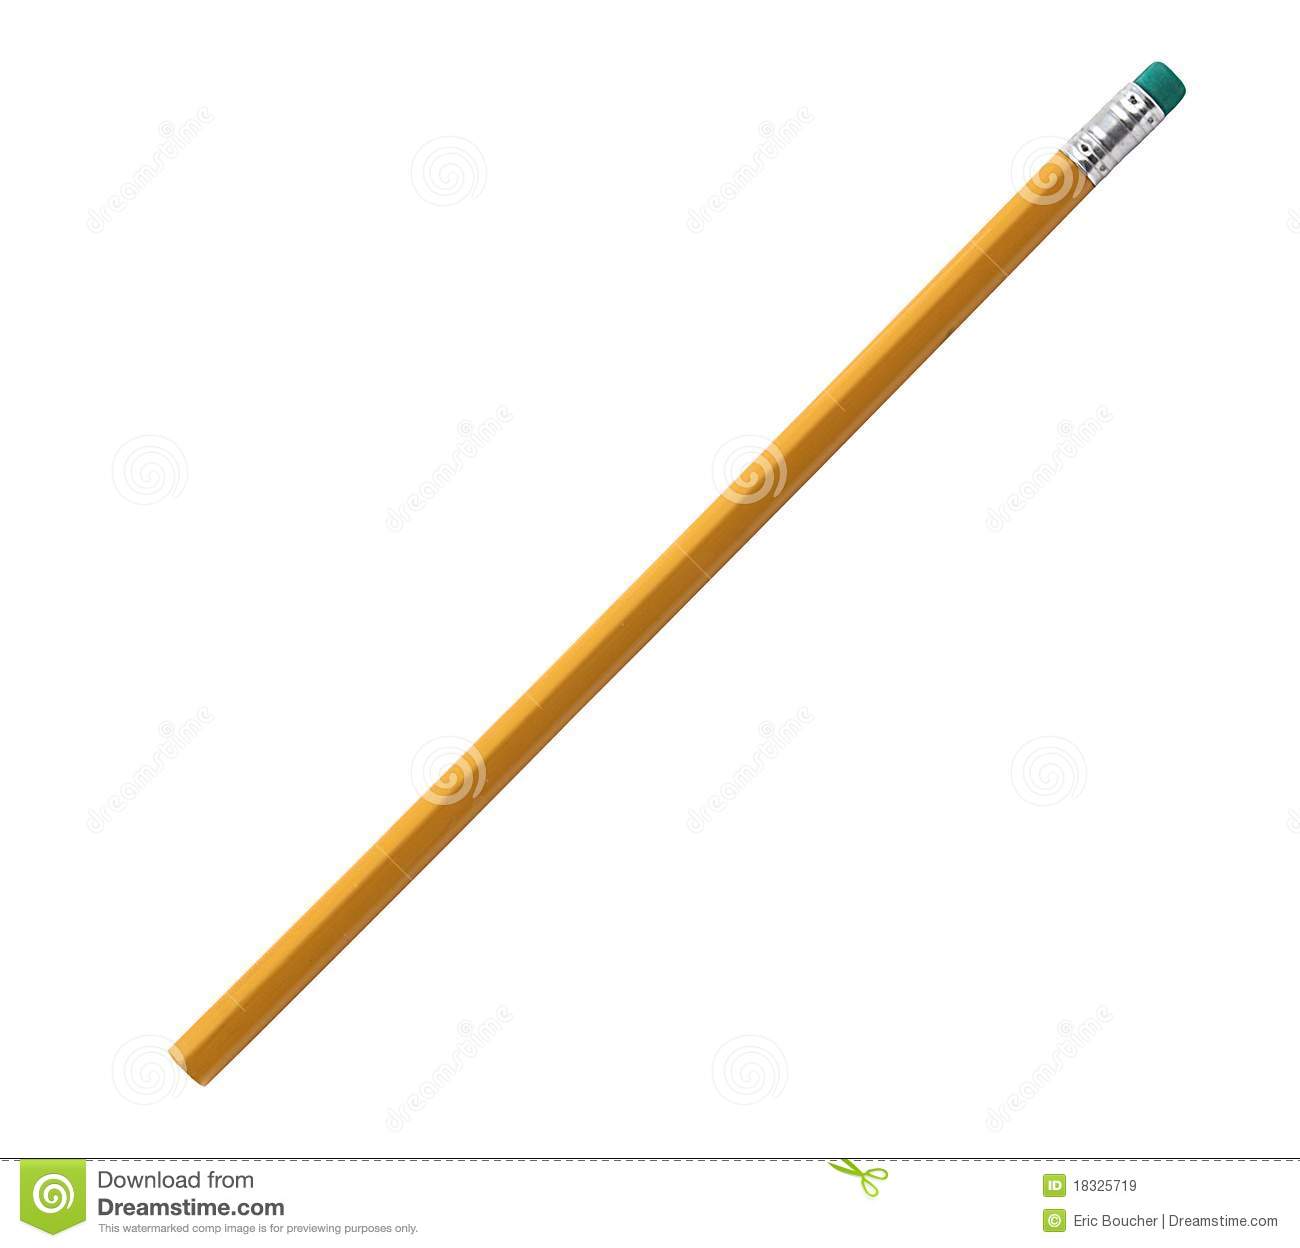 New Pencil Royalty Free Stock Images   Image  18325719